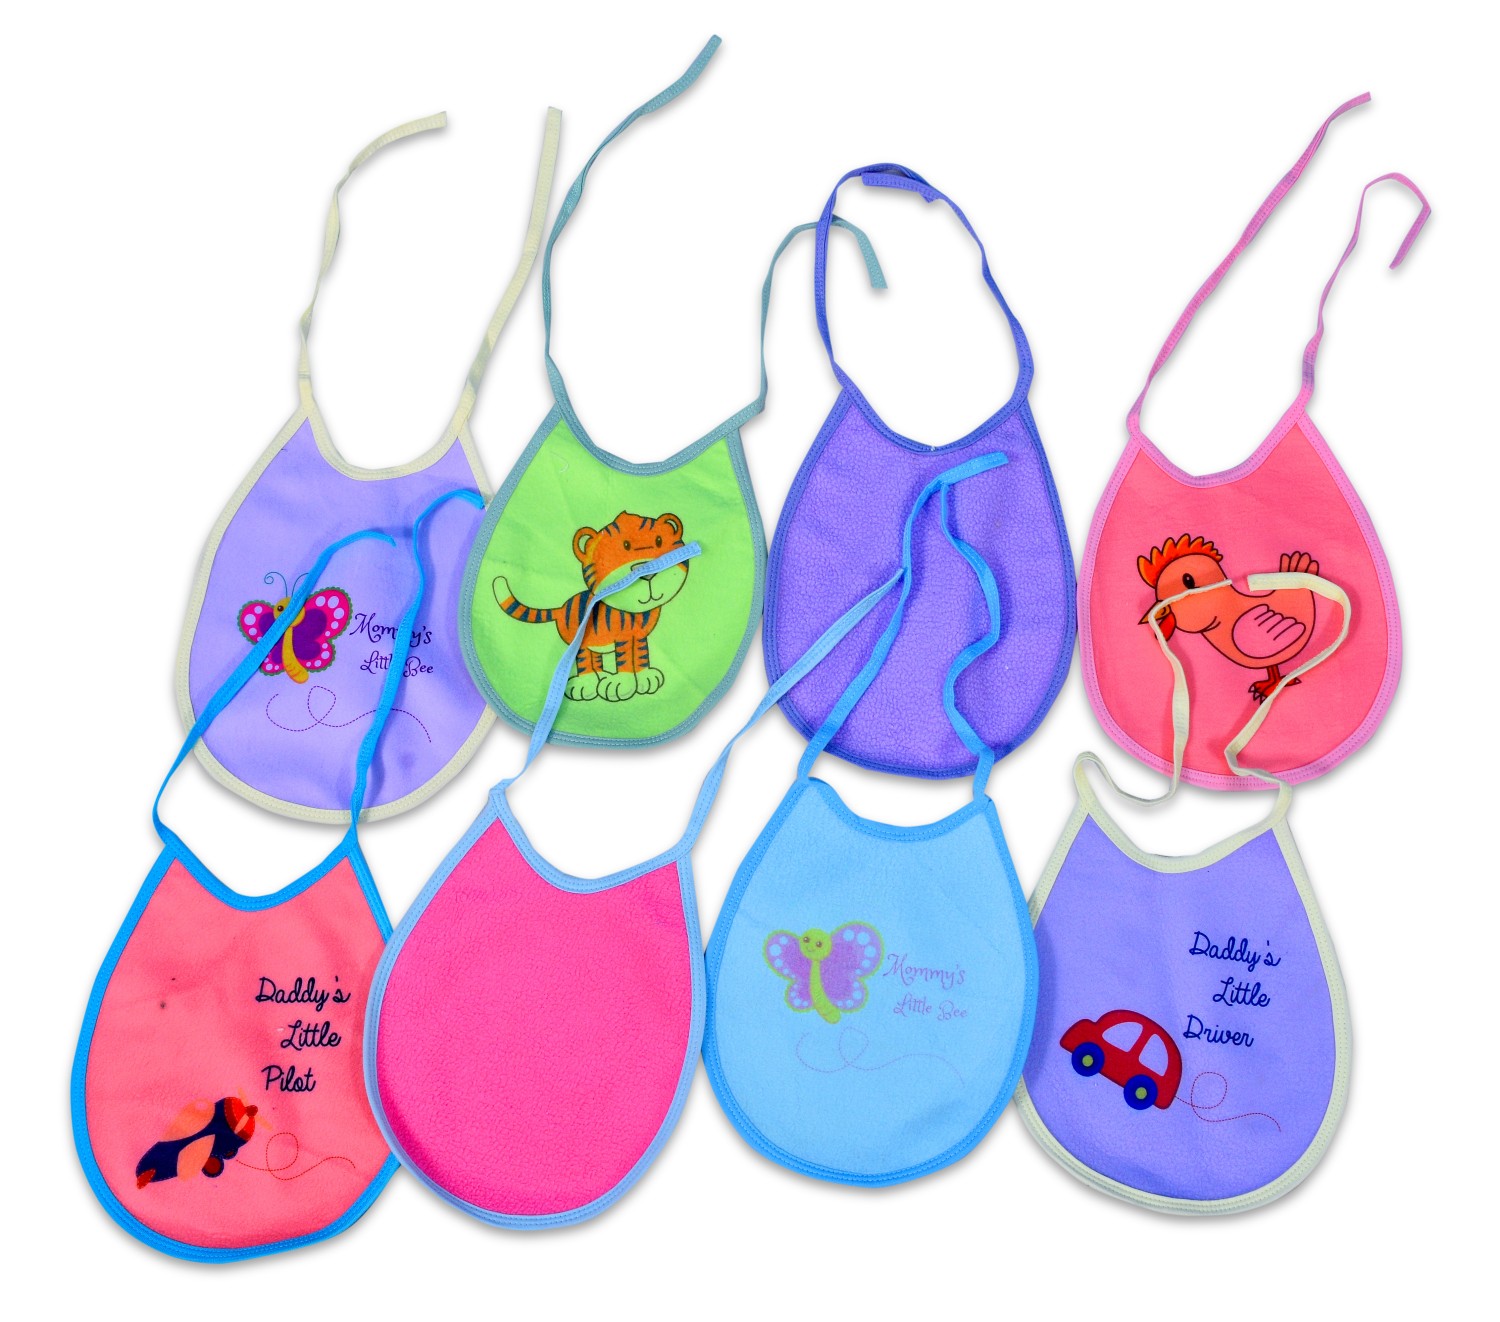 Soft Cotton Bibs/Aprons for Baby - Thoughtfully Designed for Comfort and Convenience in Mealtime